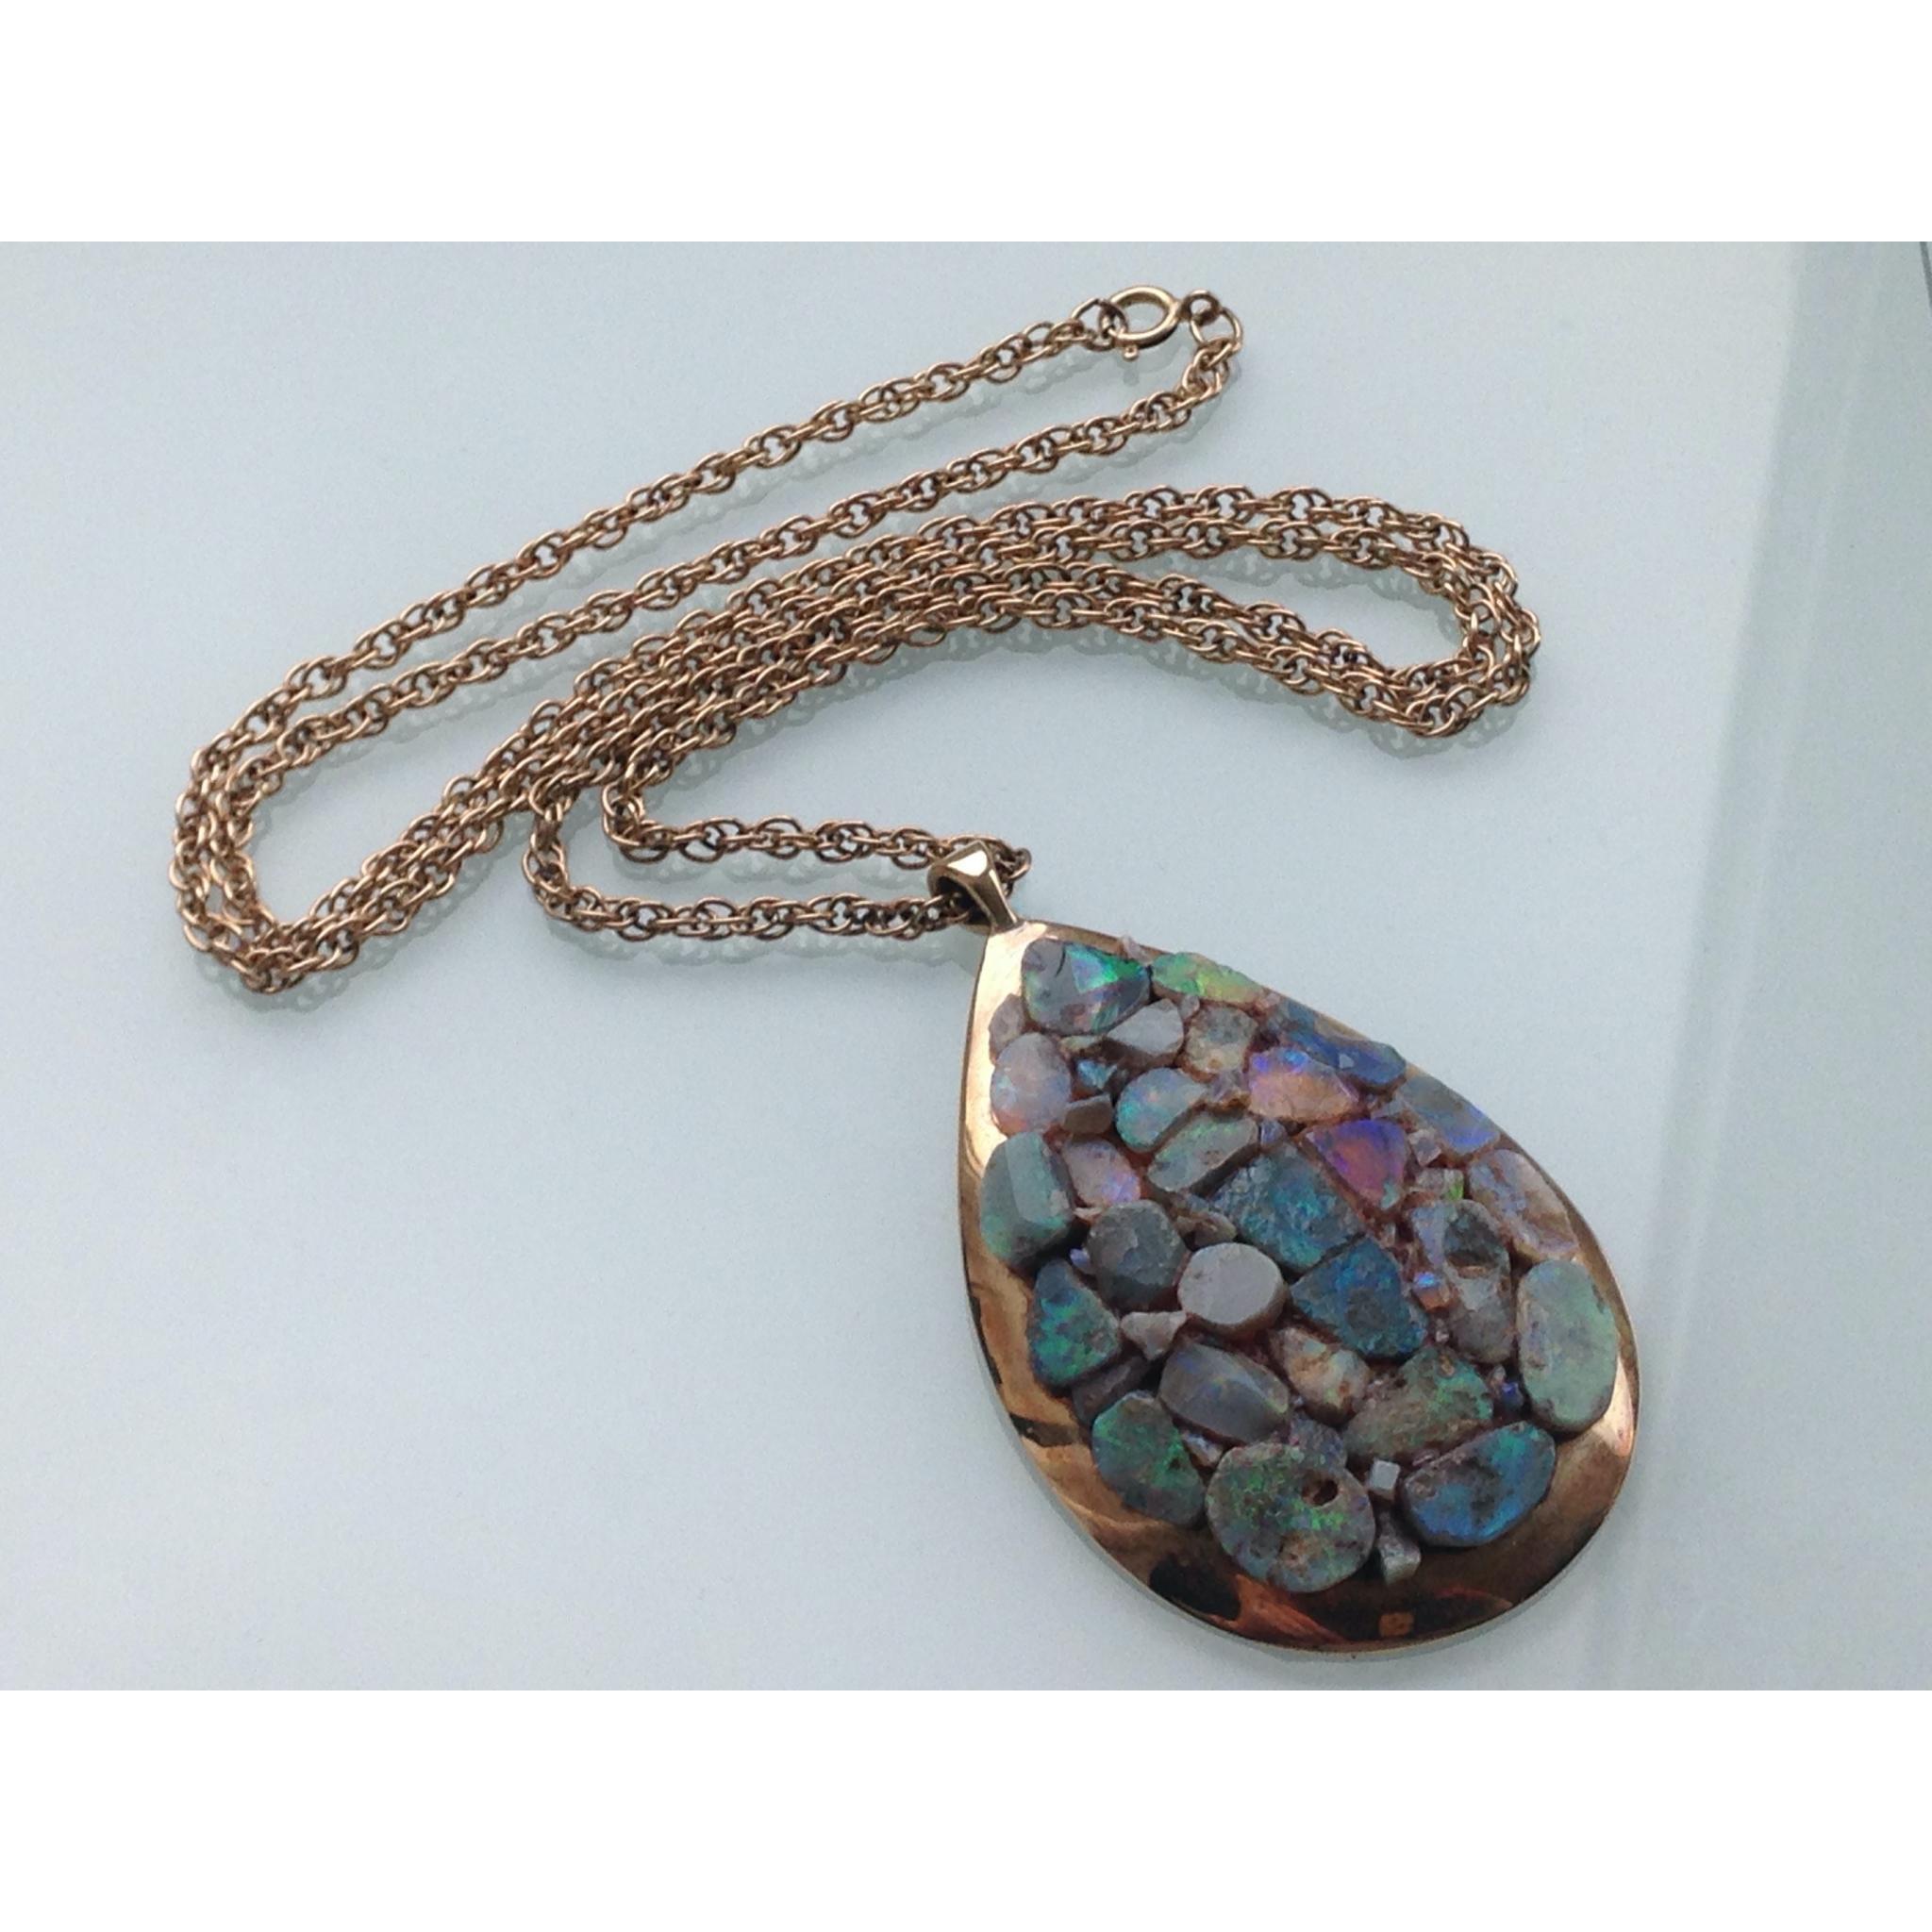 Contemporary 9ct 375 Gold Raw Opal Pendant
& 9ct 375 Gold 24